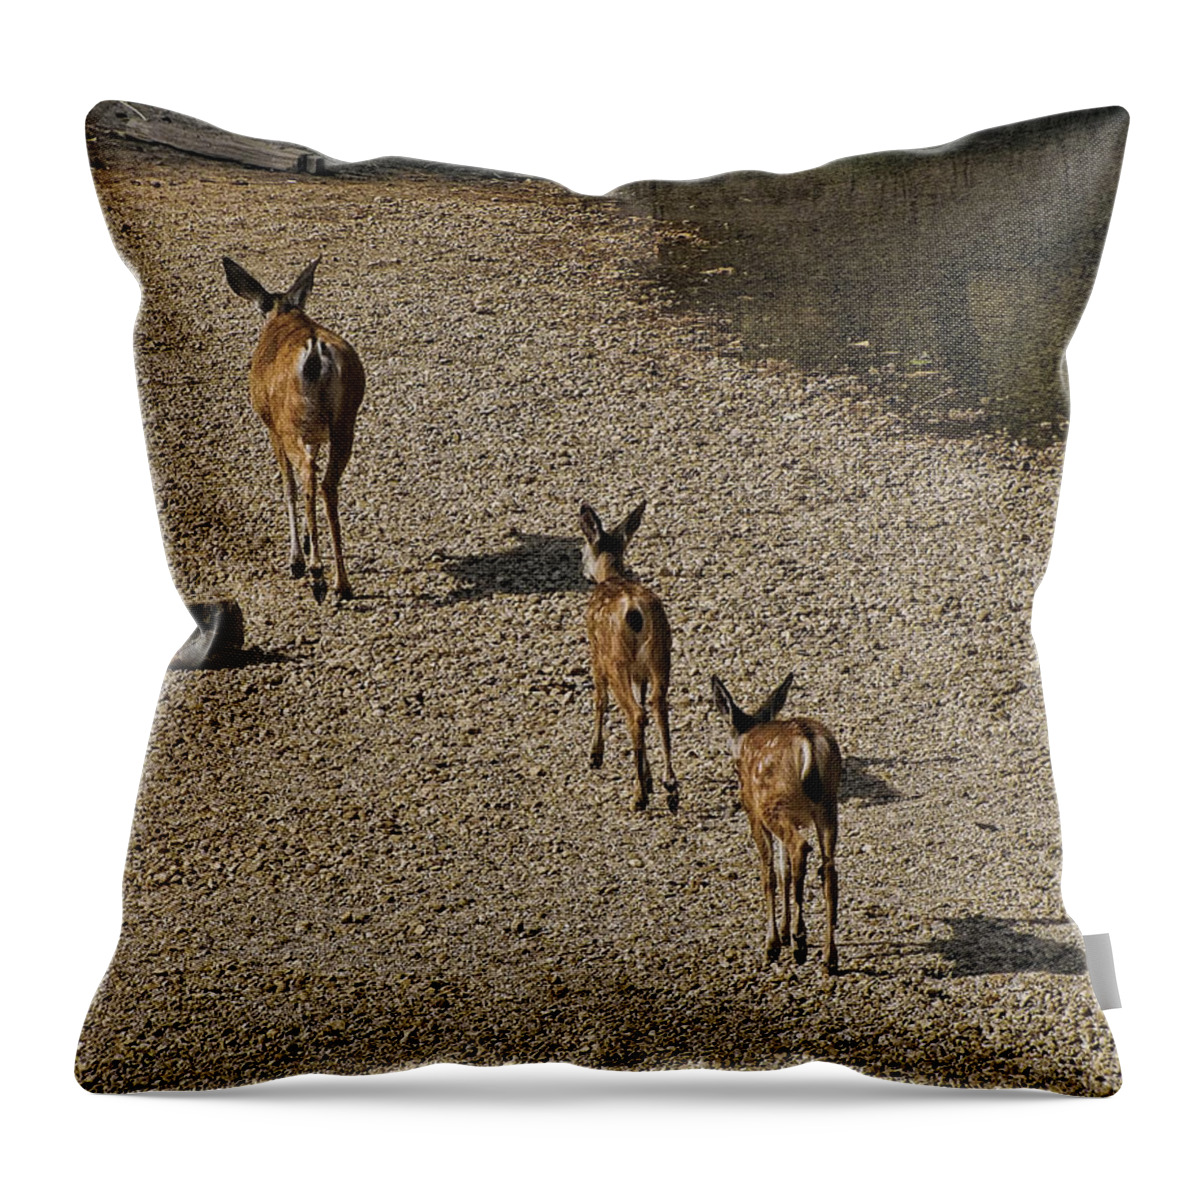 Yosemite Throw Pillow featuring the photograph Yosemite National Park #11 by Helaine Cummins